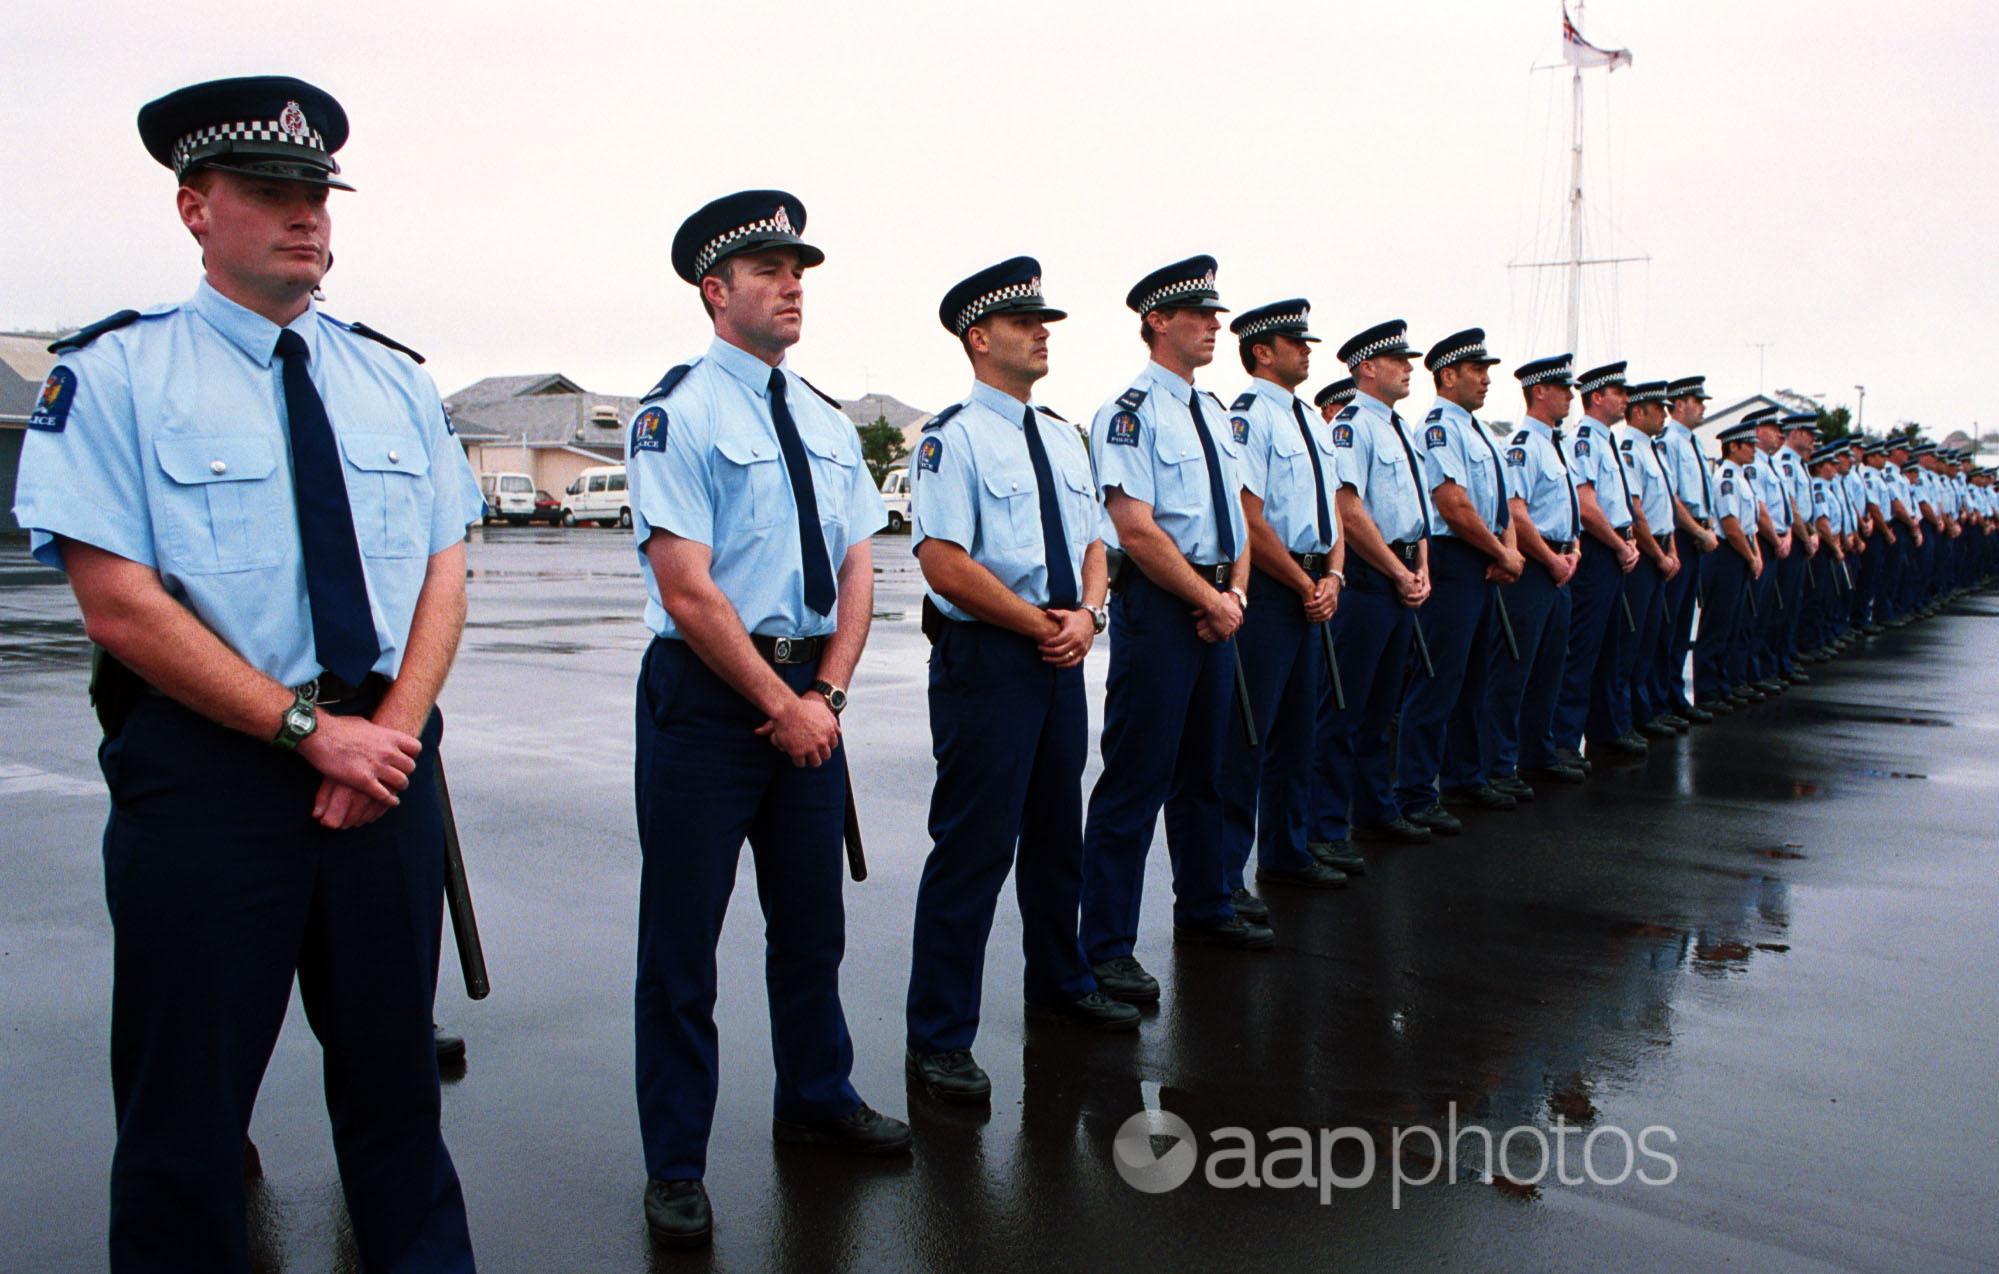 A line of NZ Police in uniform